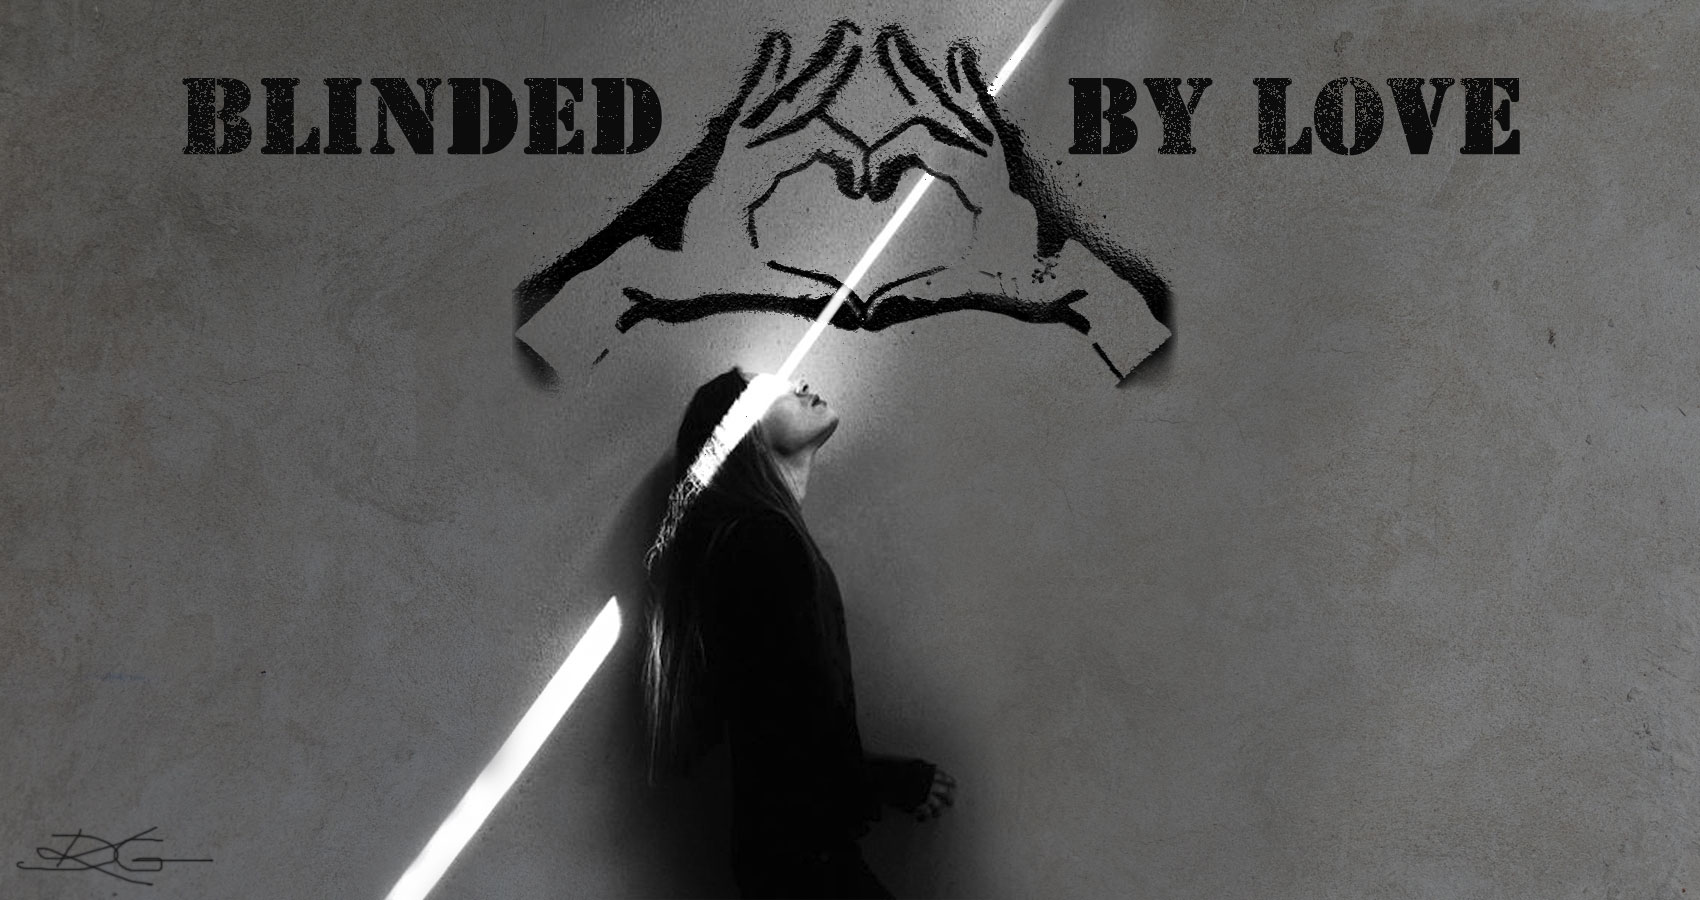 Blinded By Love written by Lucinda S. Horel at Spillwords.com